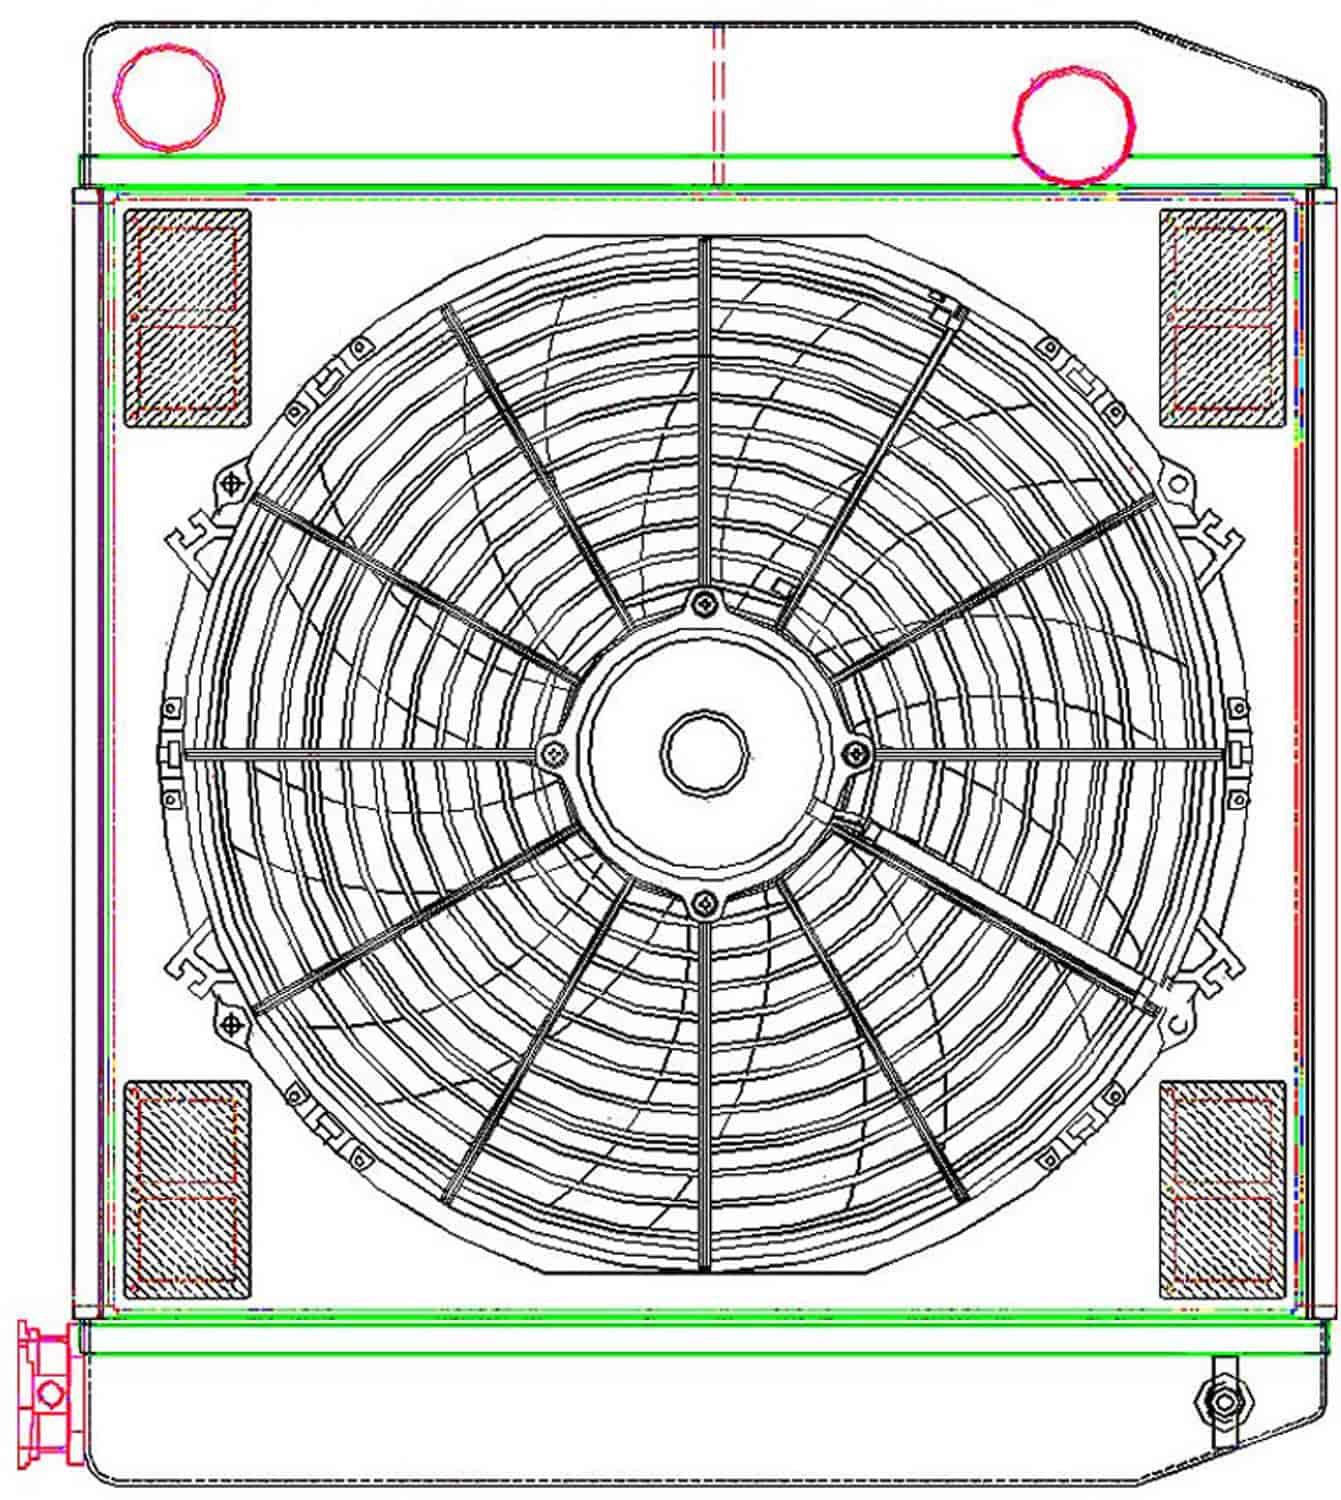 MegaCool ComboUnit Universal Fit Radiator and Fan Dual Pass Crossflow Design 22" x 19" with Straight Outlet